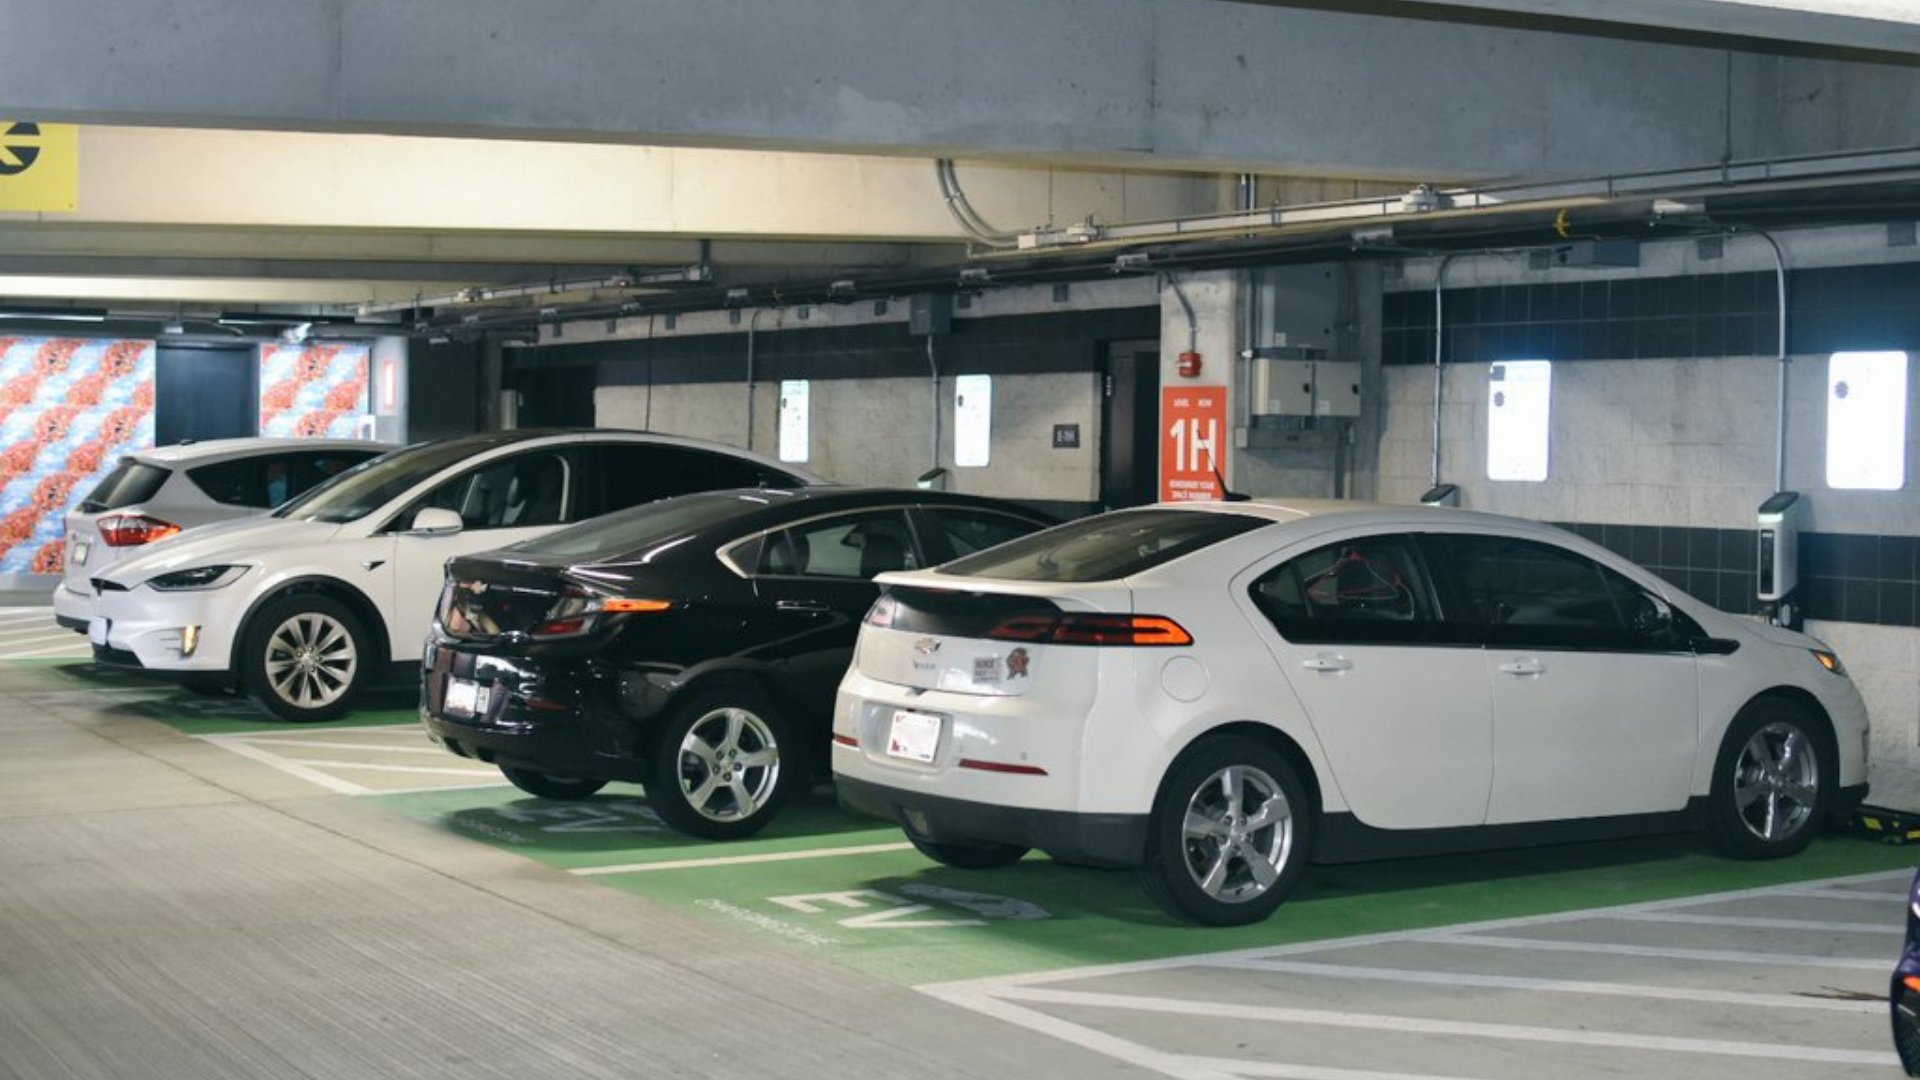 May 24, 2021 - BWI Thurgood Marshall Airport and BGE Celebrate New Electric  Vehicle Charging Stations